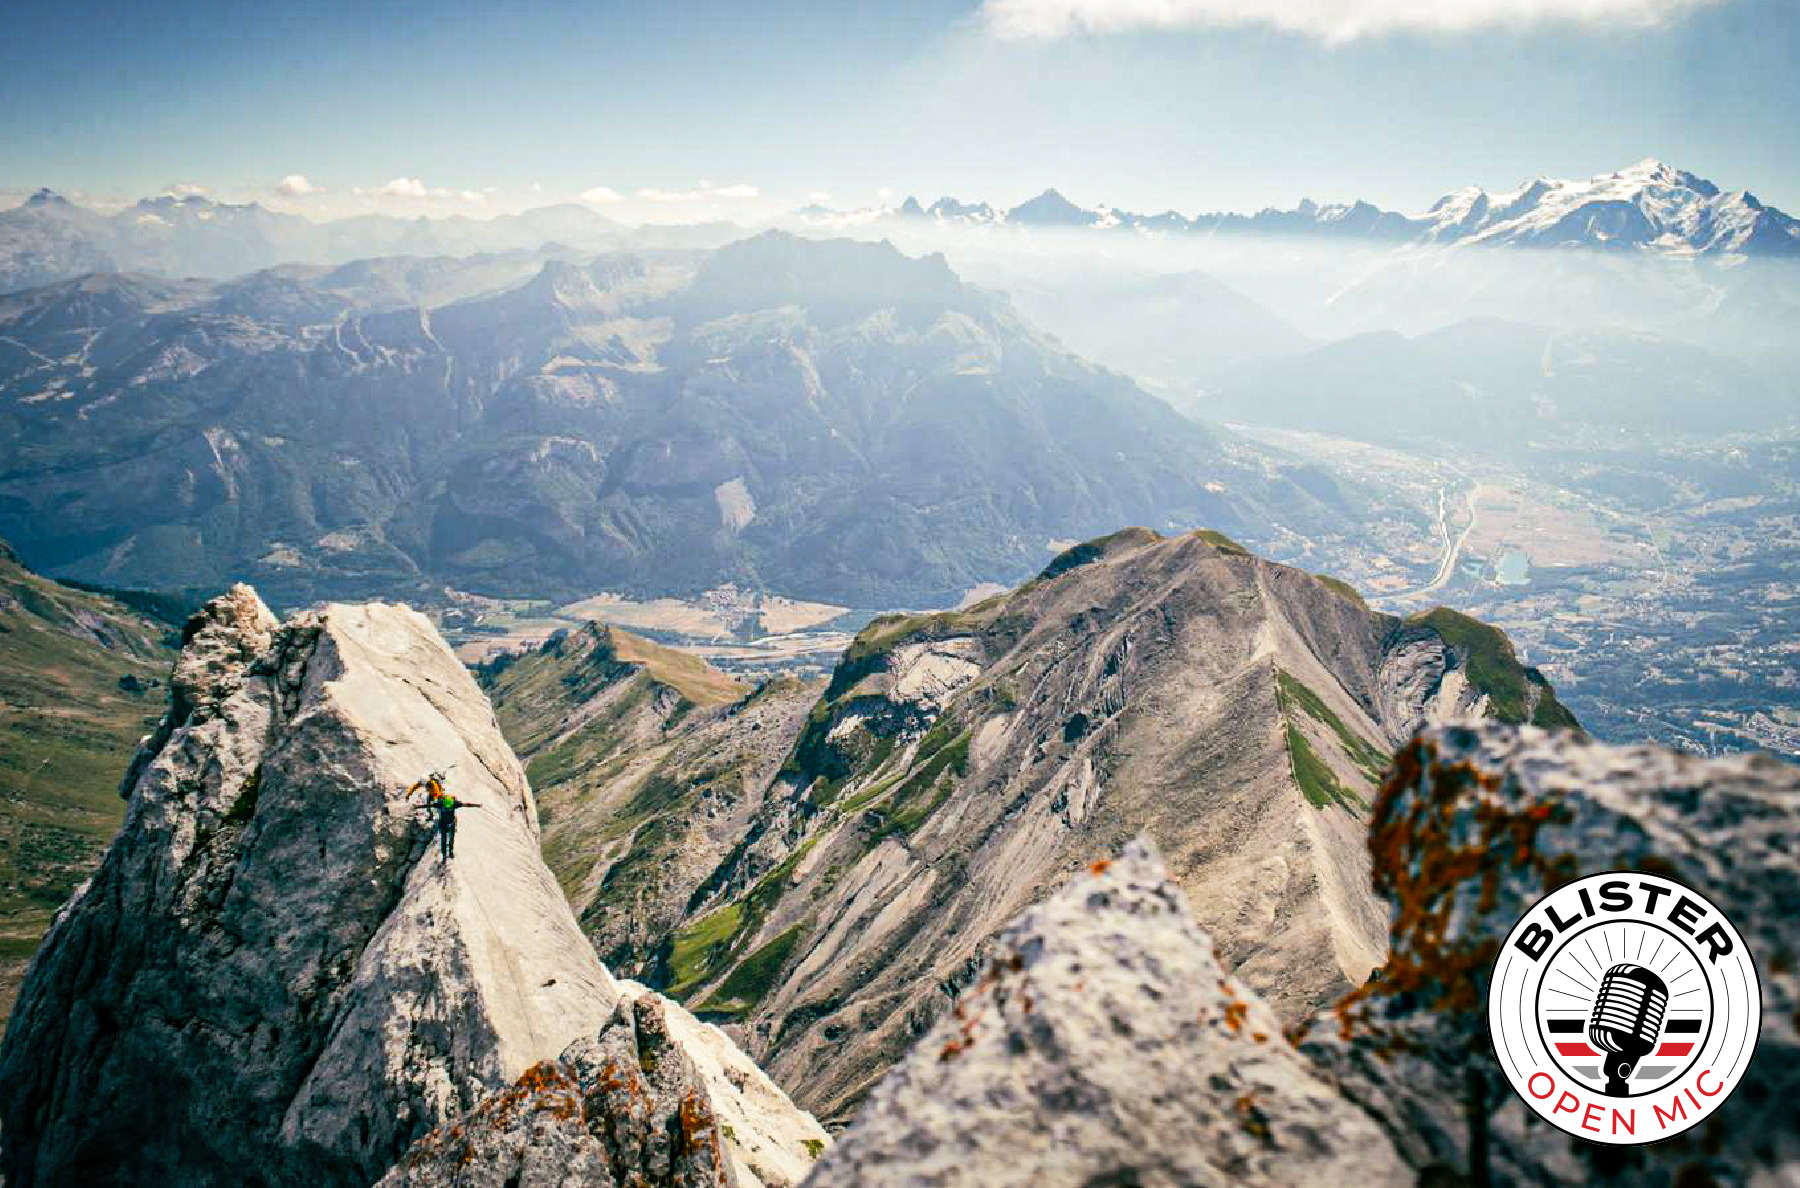 Andrew Alexander King: On Climbing in the Alps, BLISTER